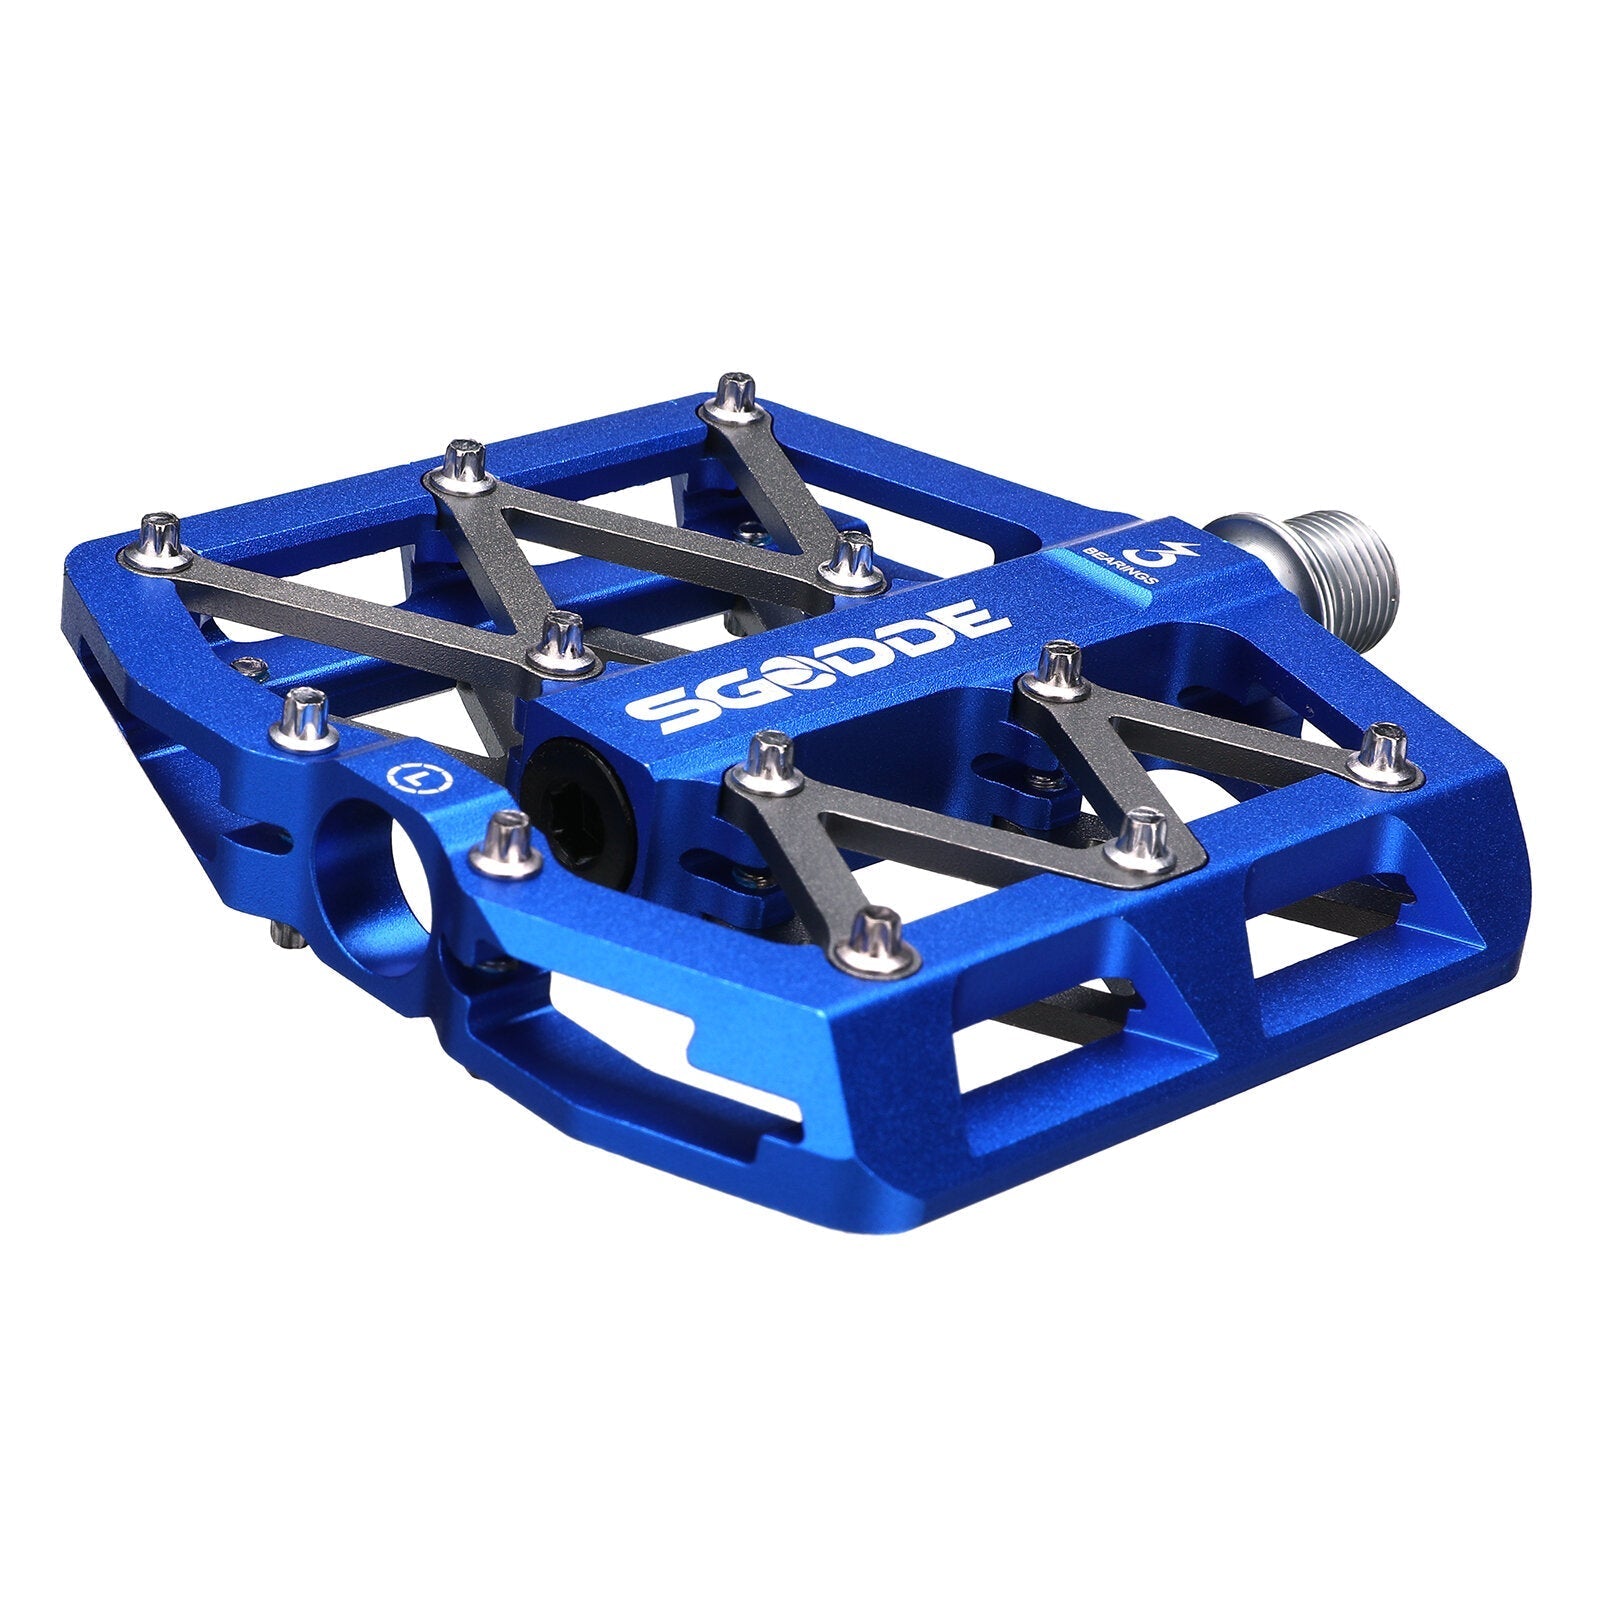 Bicycle Mountain Bike Pedals Platform Bicycle Flat Non-Slip Outdoor Cycling Flat Pedals